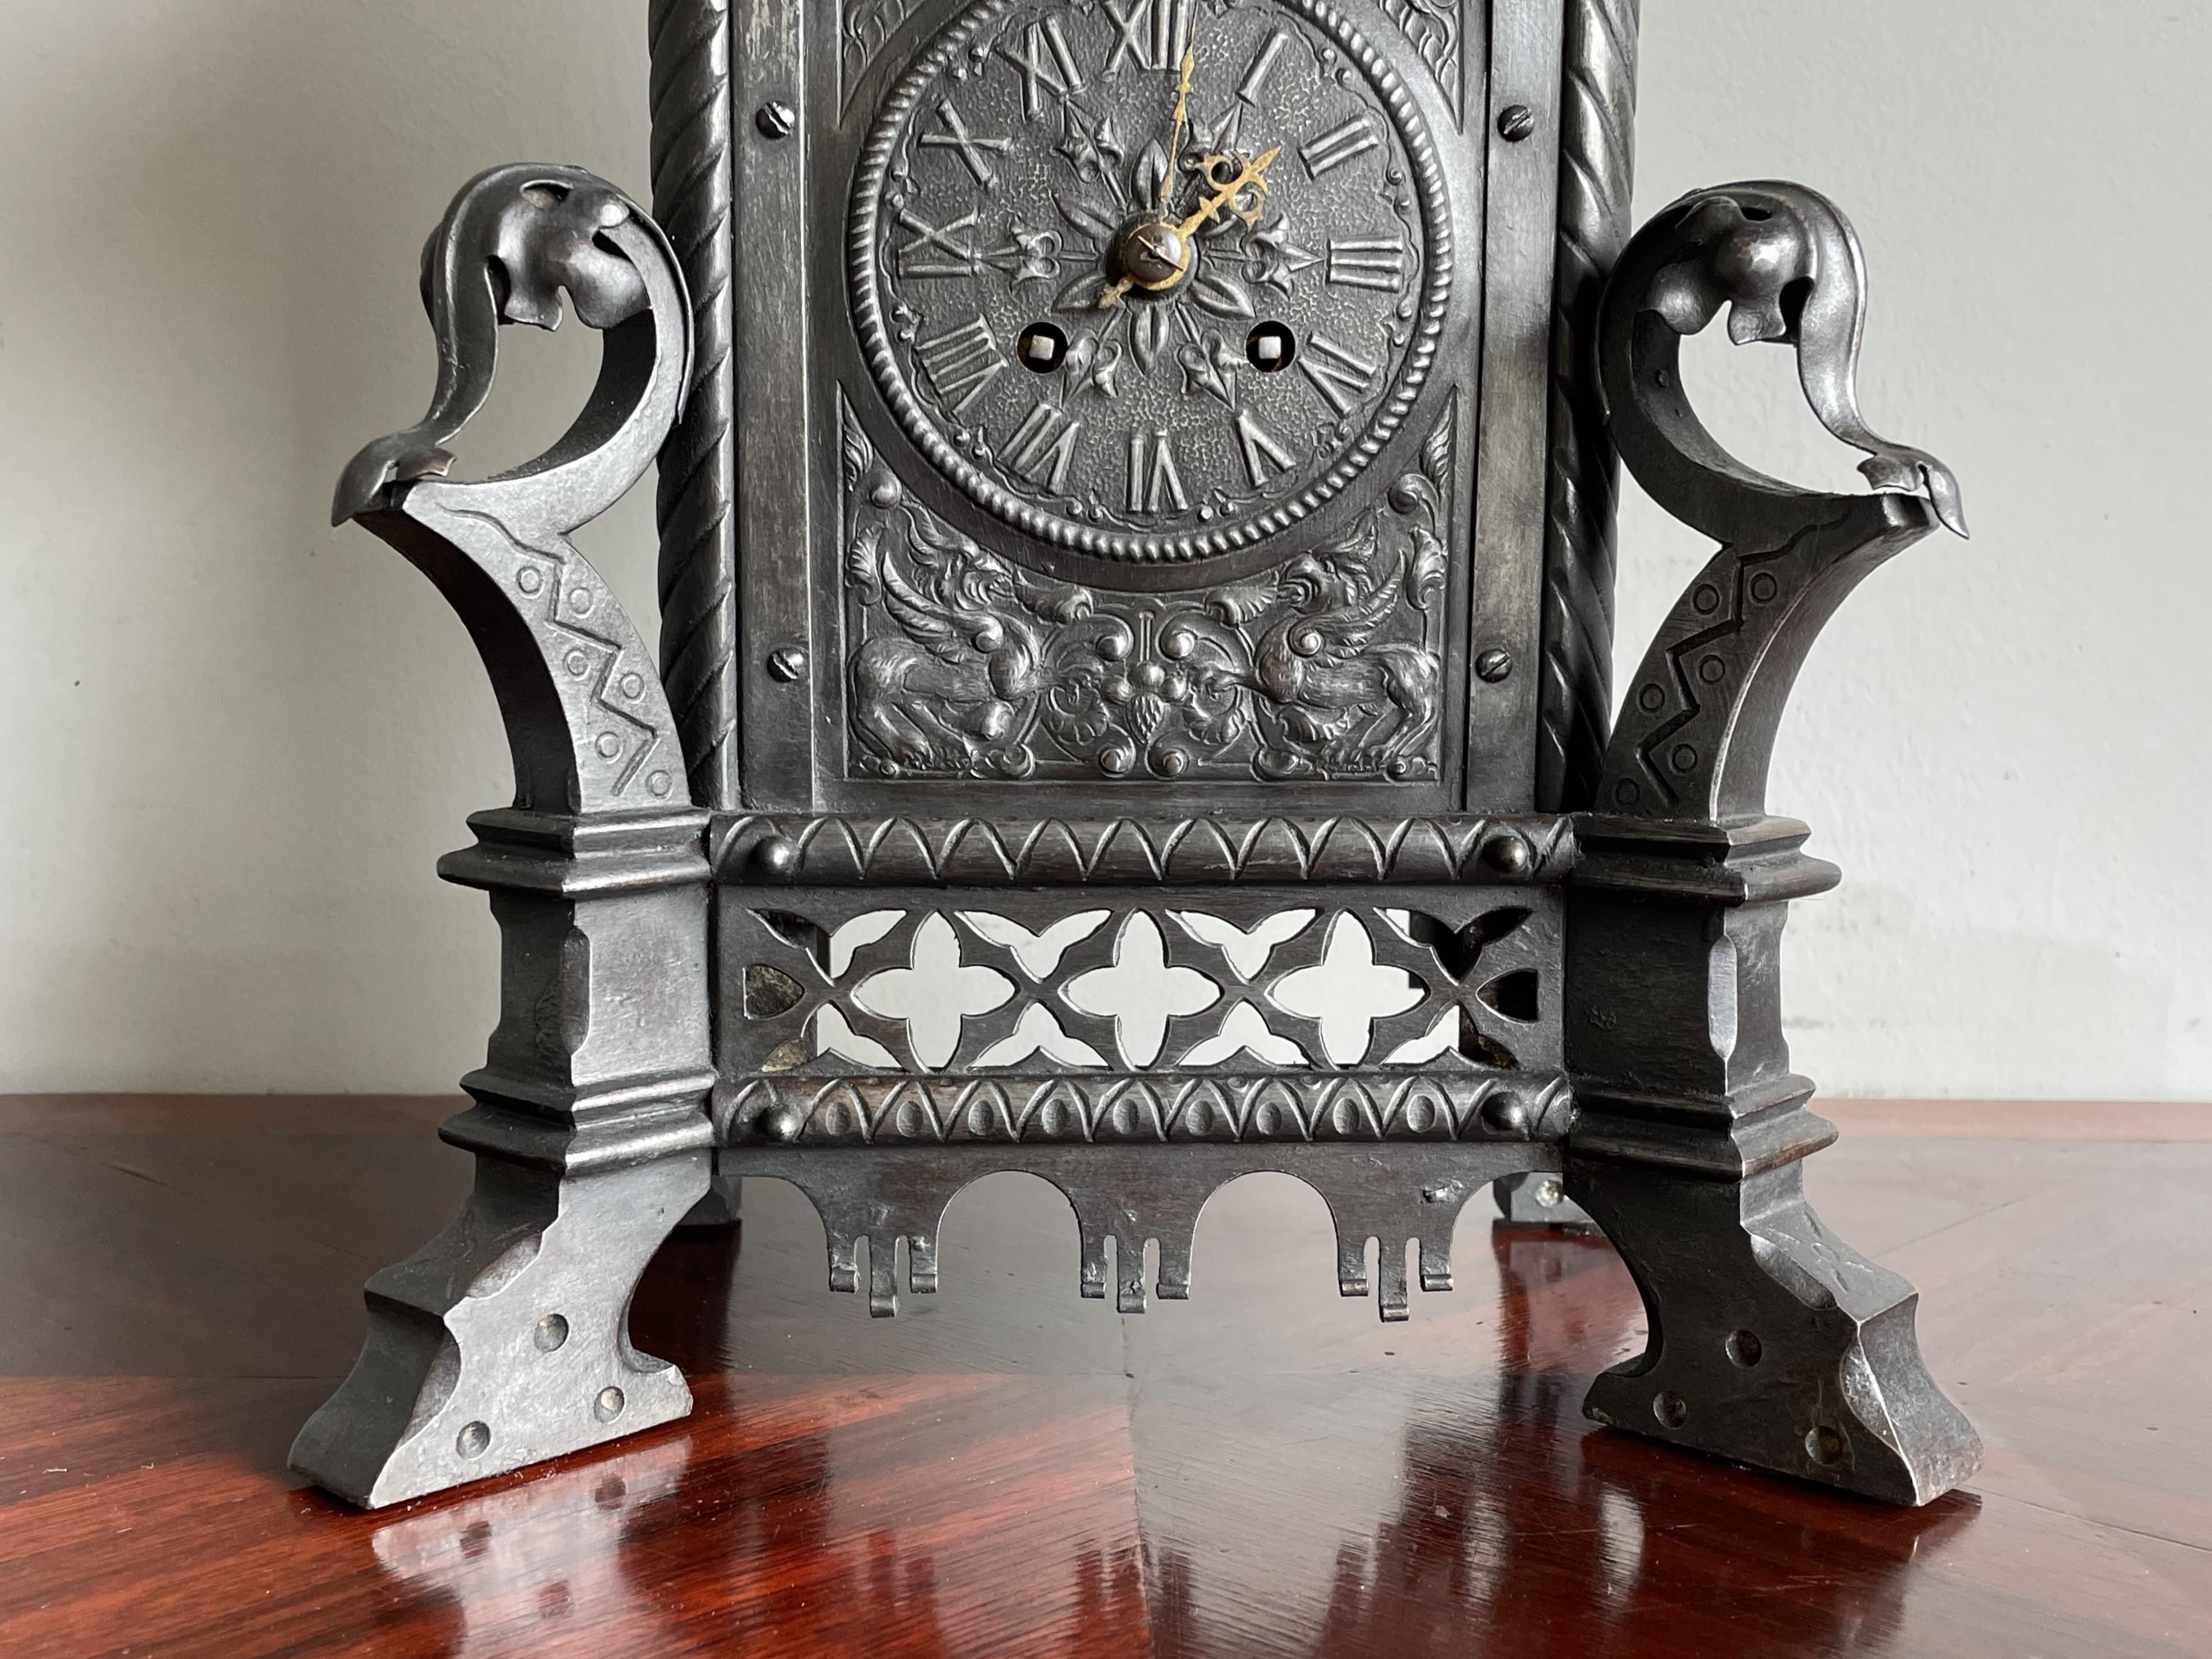 Antique Gothic Revival Forged Wrought & Cast Iron Table Clock by Samuel Marti 1